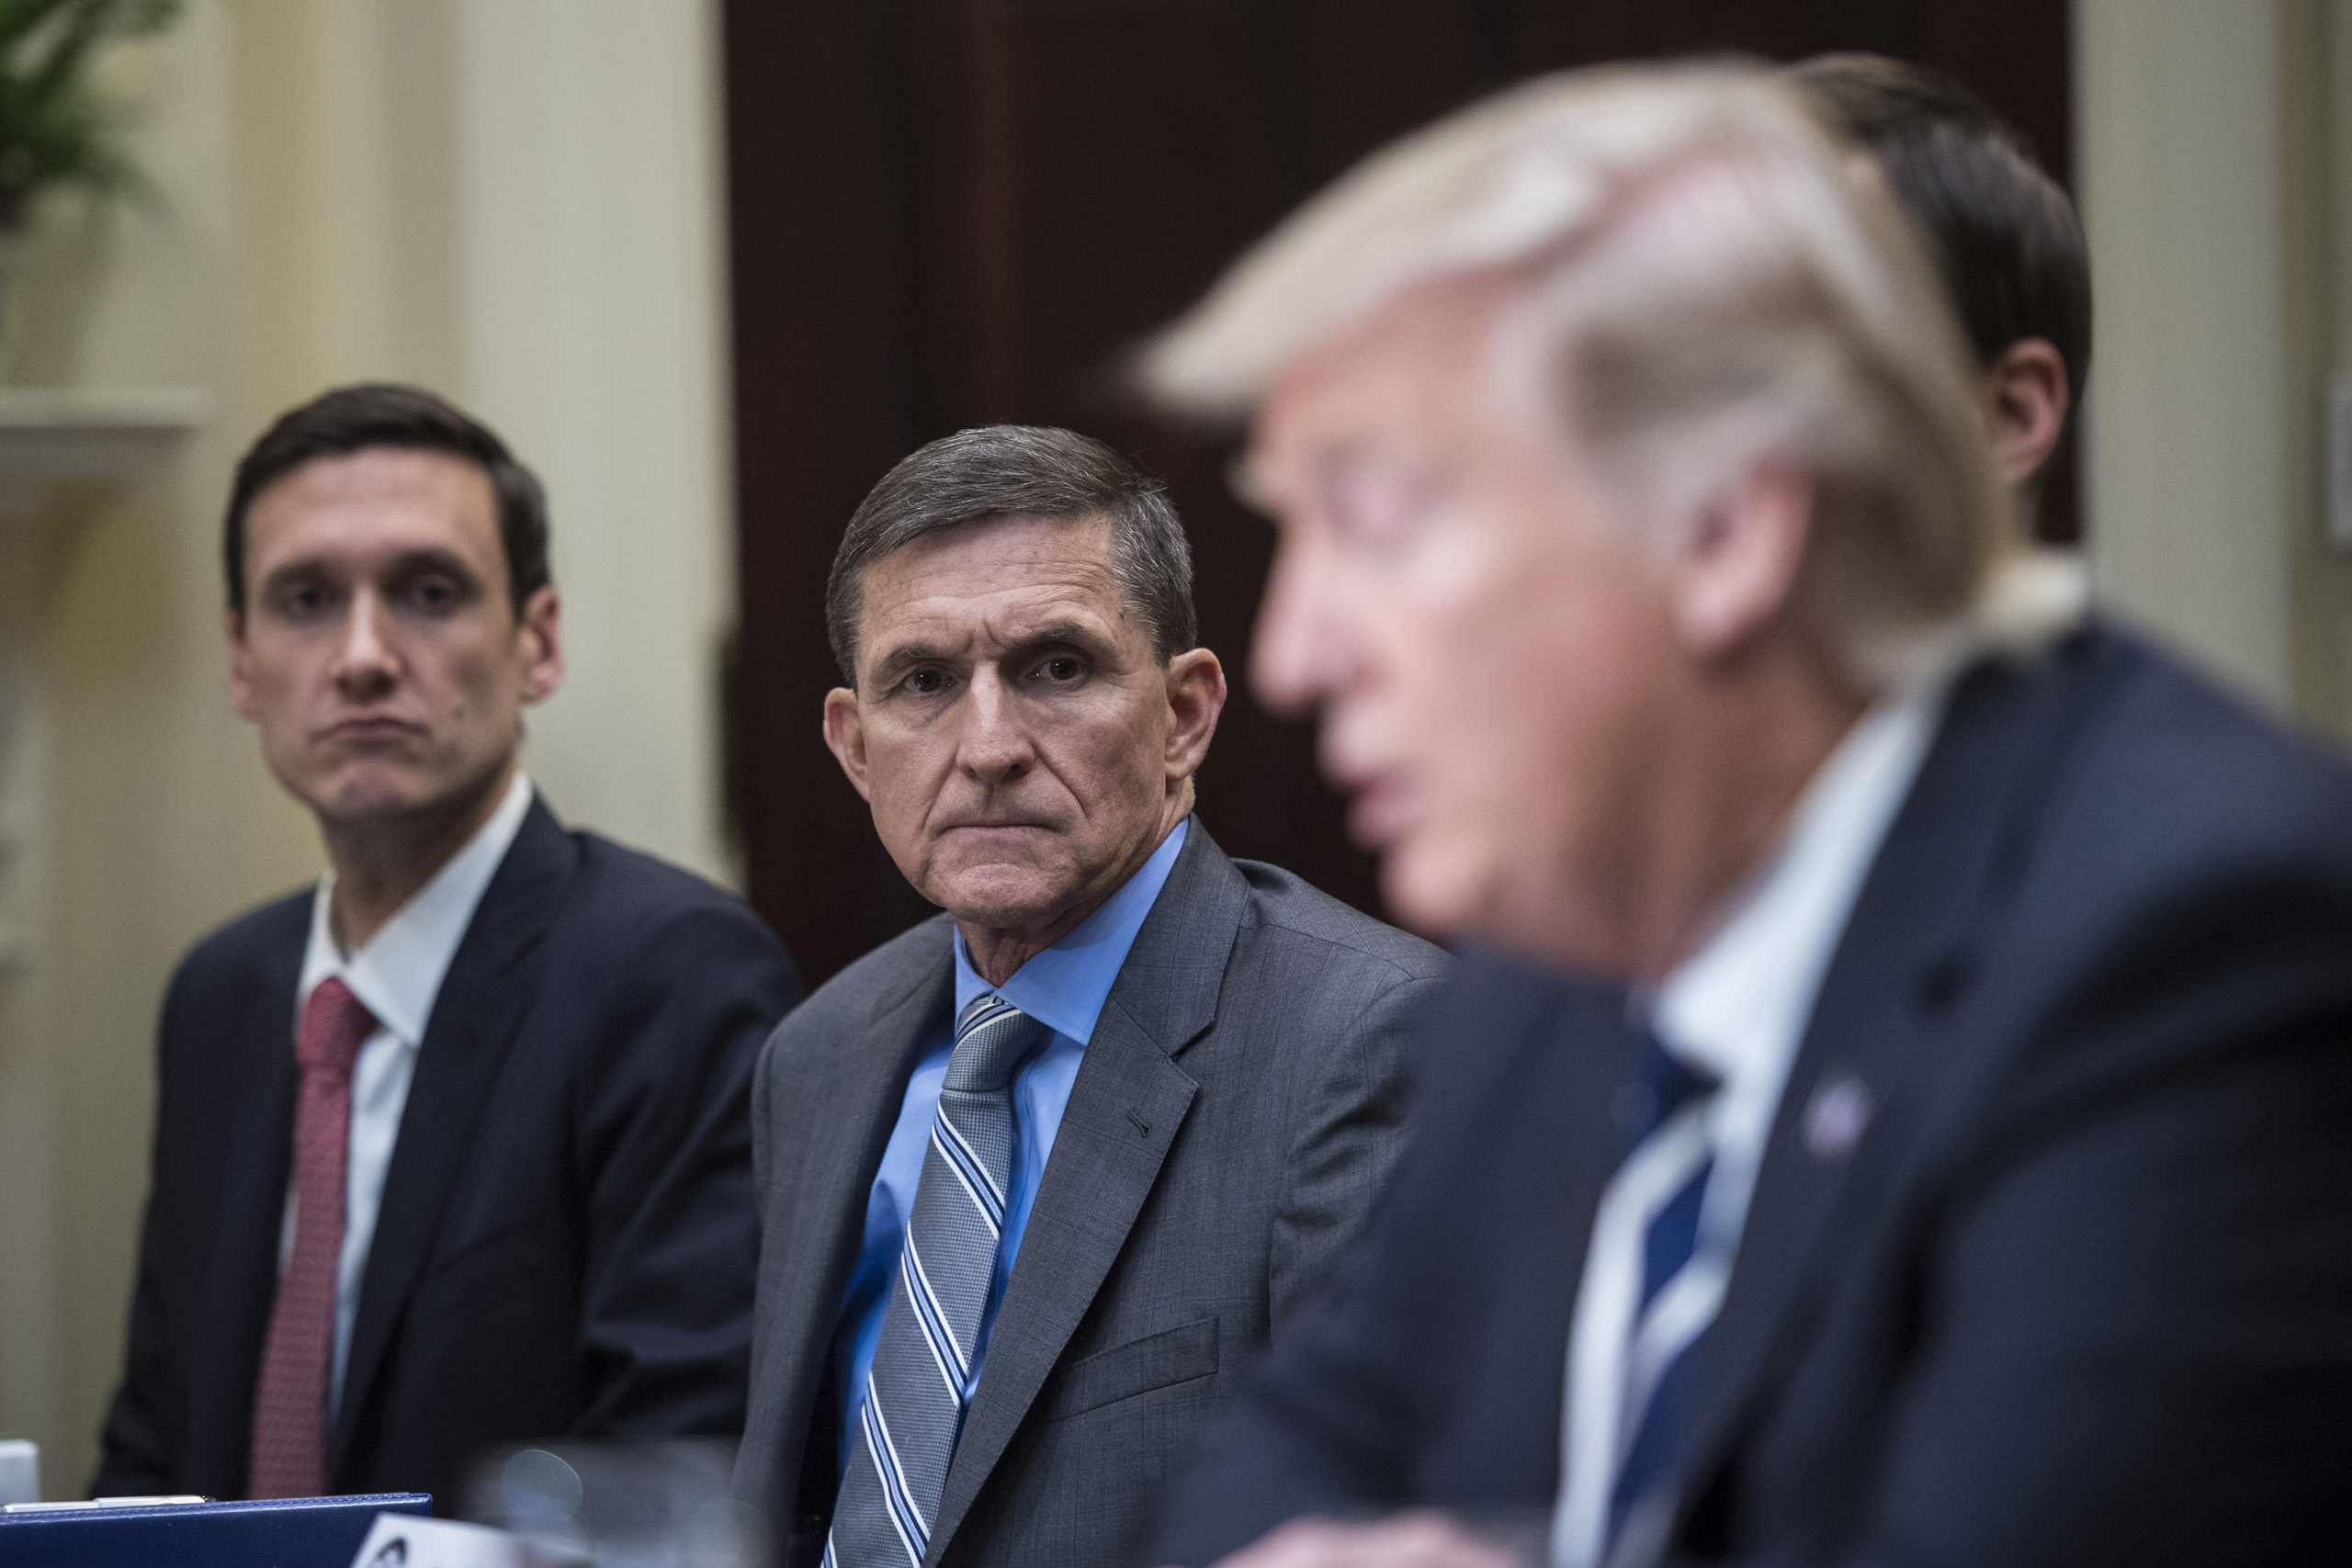 National Security Adviser Mike Flynn listens to President Trump during a listening session with cyber security experts in the Roosevelt Room of the White House in Washington, DC on Jan. 31, 2017. (Jabin Botsford—The Washington Post/Getty Images)